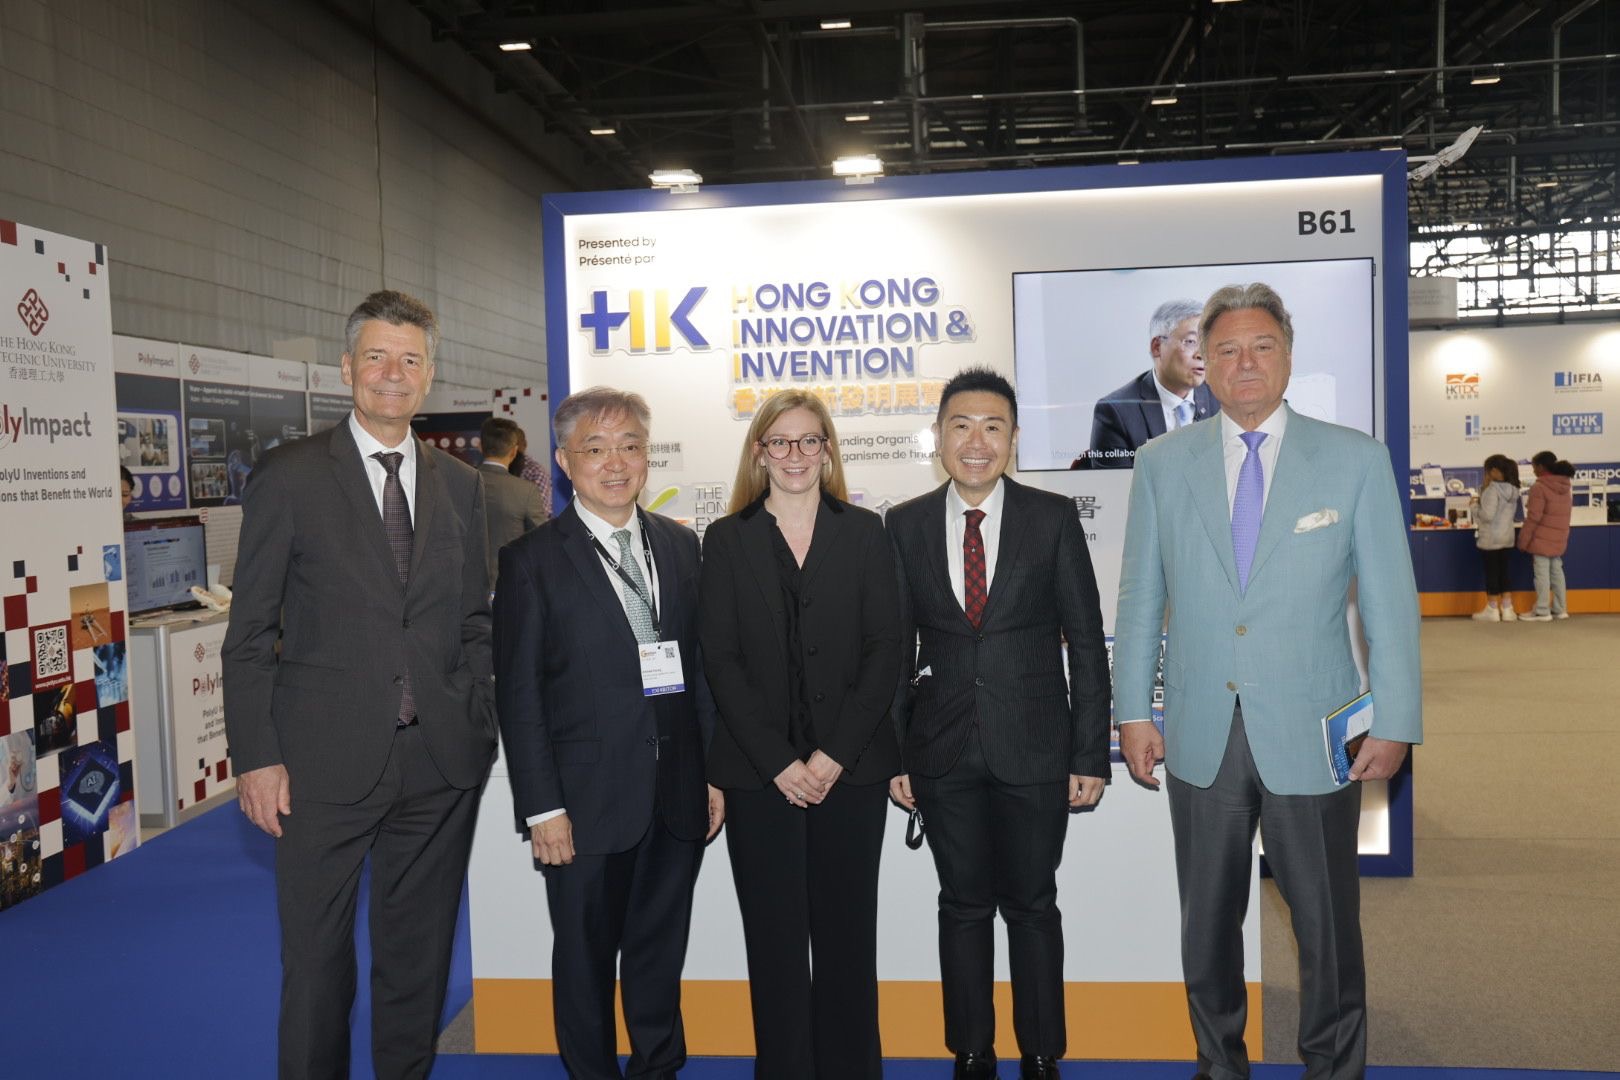 The Hong Kong Innovation and Invention Exhibition, a program of the Hong Kong Exporters Association, showcases Hong Kong's innovation and technology potential to the world From left: Claude Membrez, CEO of Palexpo; HKEA Honorary Advisor, IR. Andrew Young; Caroline Simonet, Director of IEIG; HKEA Chairman, Eric Sun; David Taji, President of the Jury, IEIG